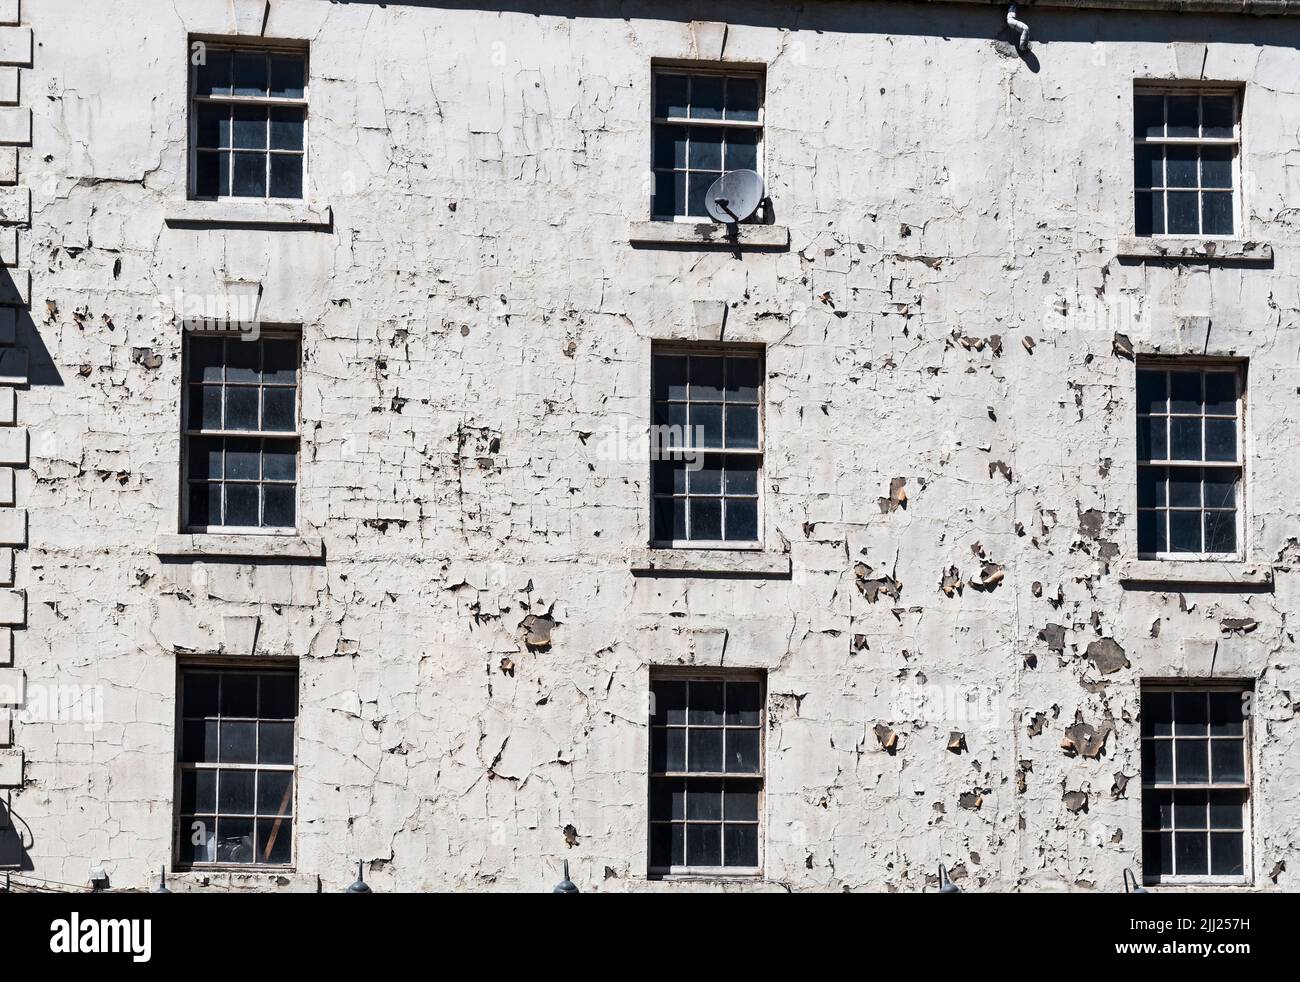 Building on Percy Street, Newcastle upon Tyne, UK with flaking white paint in a state of disrepair. Stock Photo